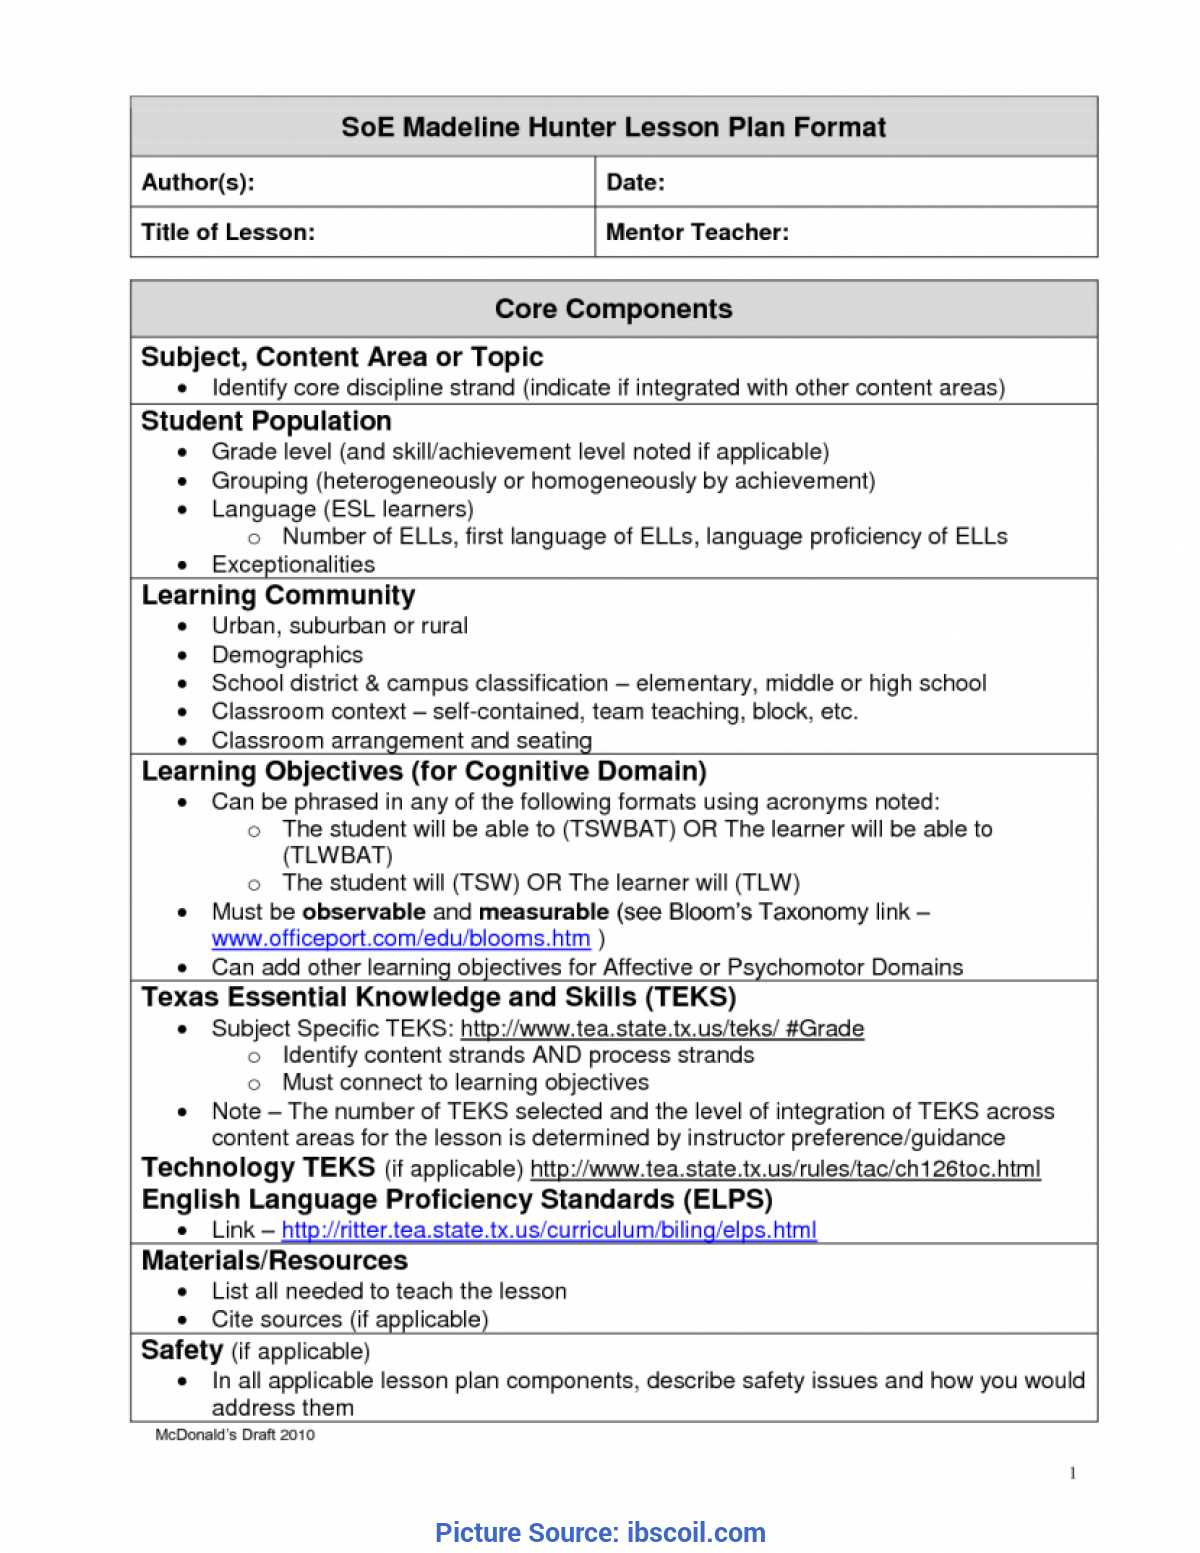 Madeline Hunter Lesson Plan Template Twiroo Com | Lesso With Madeline Hunter Lesson Plan Template Word